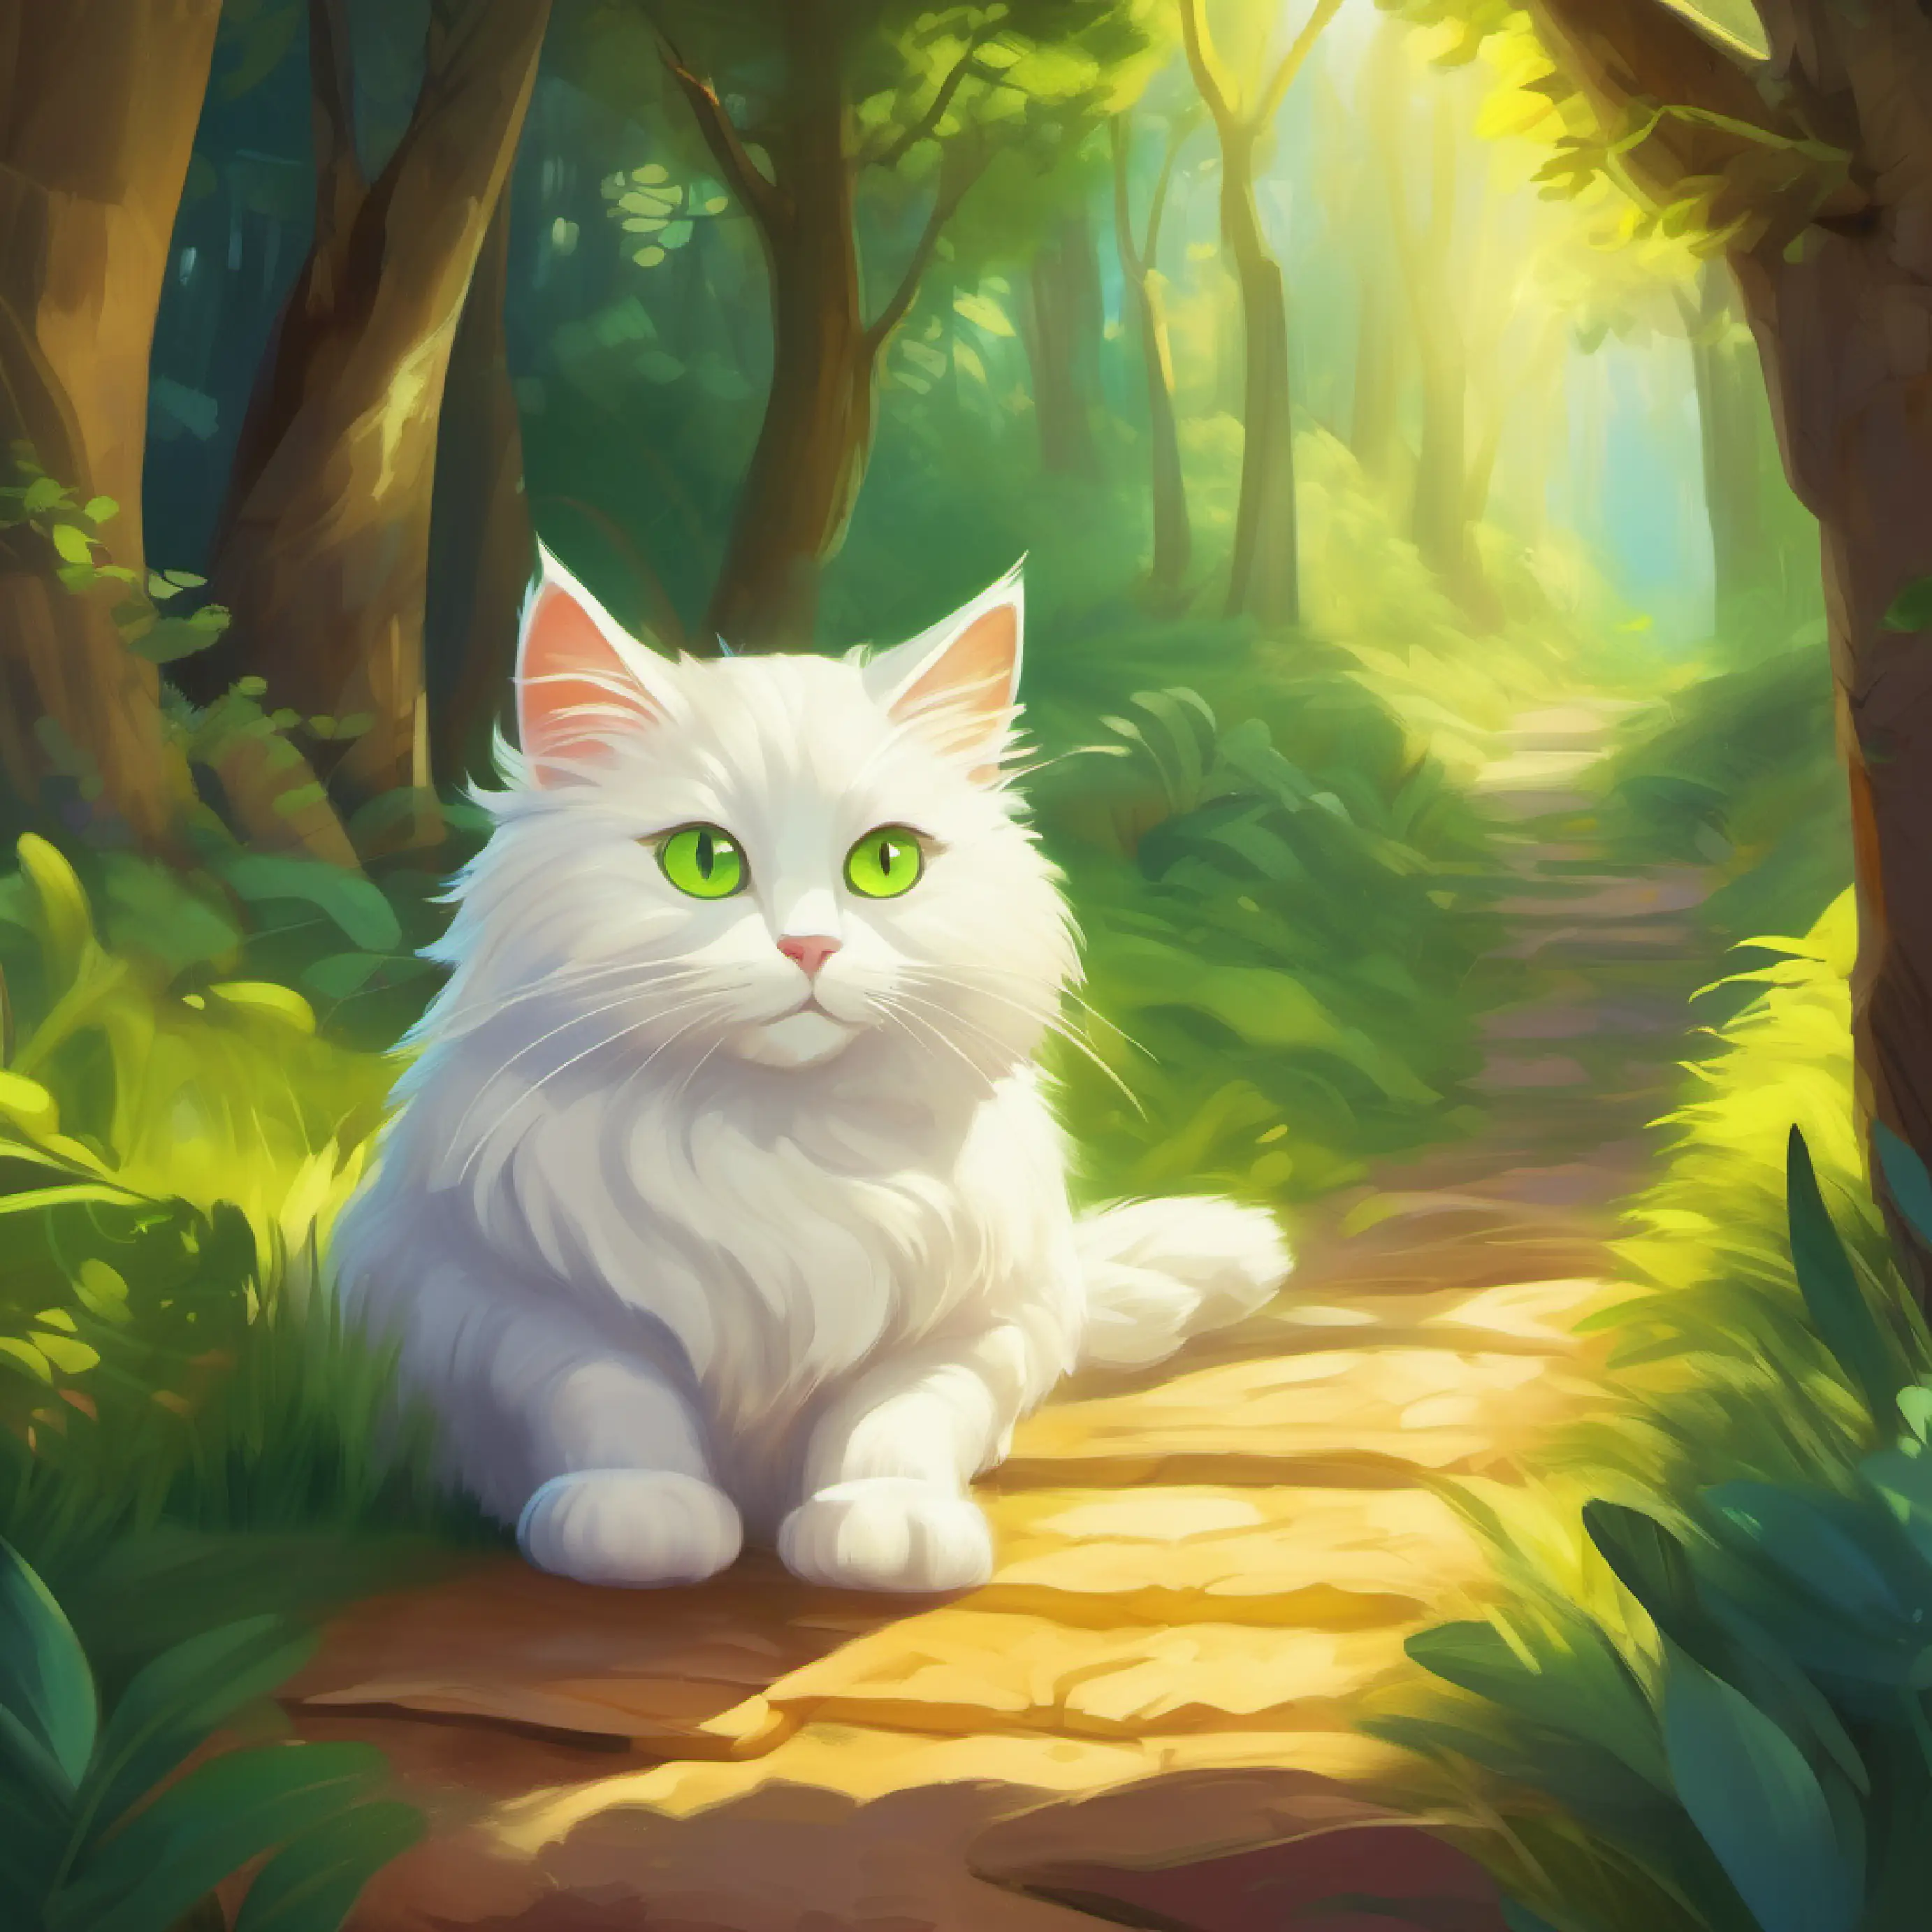 Introduction to Fluffy white cat with yellow-green eyes, adventurous and his decision to go on an adventure.